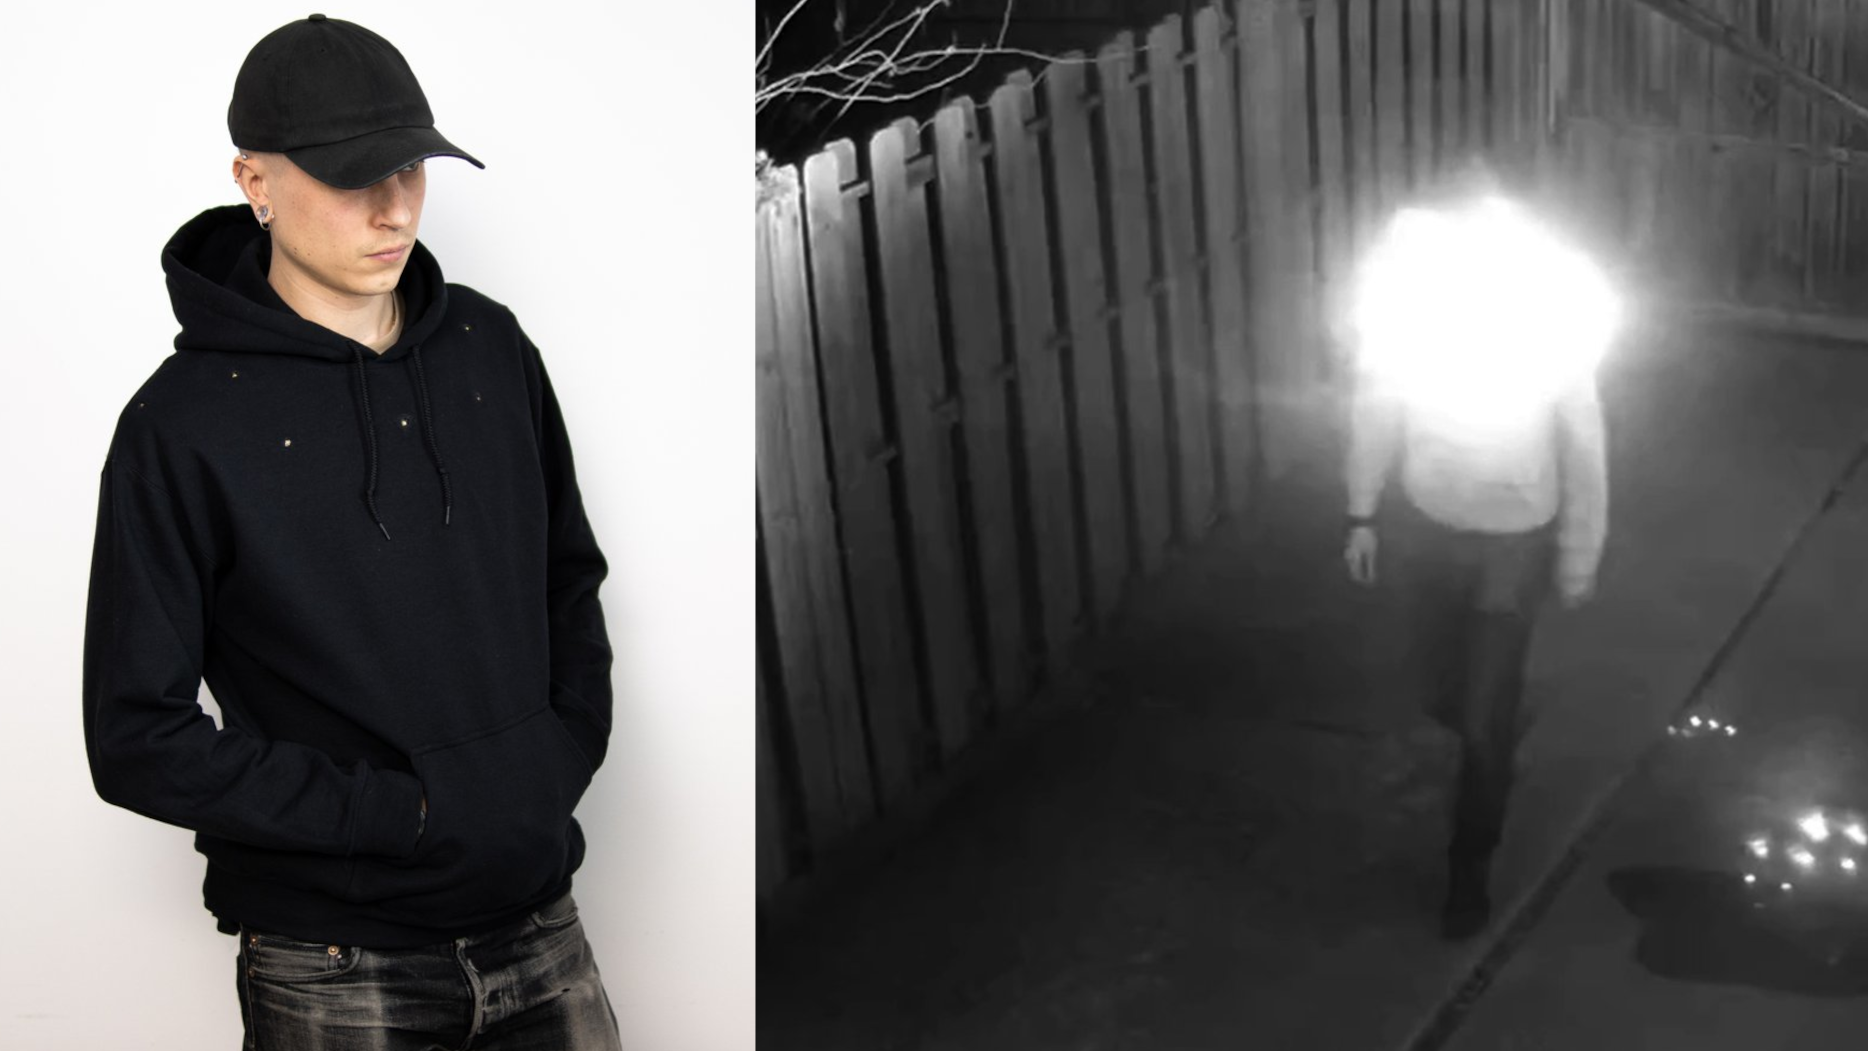 Adversarial IR Hoodie Lets You Own The Night In Anonymity | Hackaday